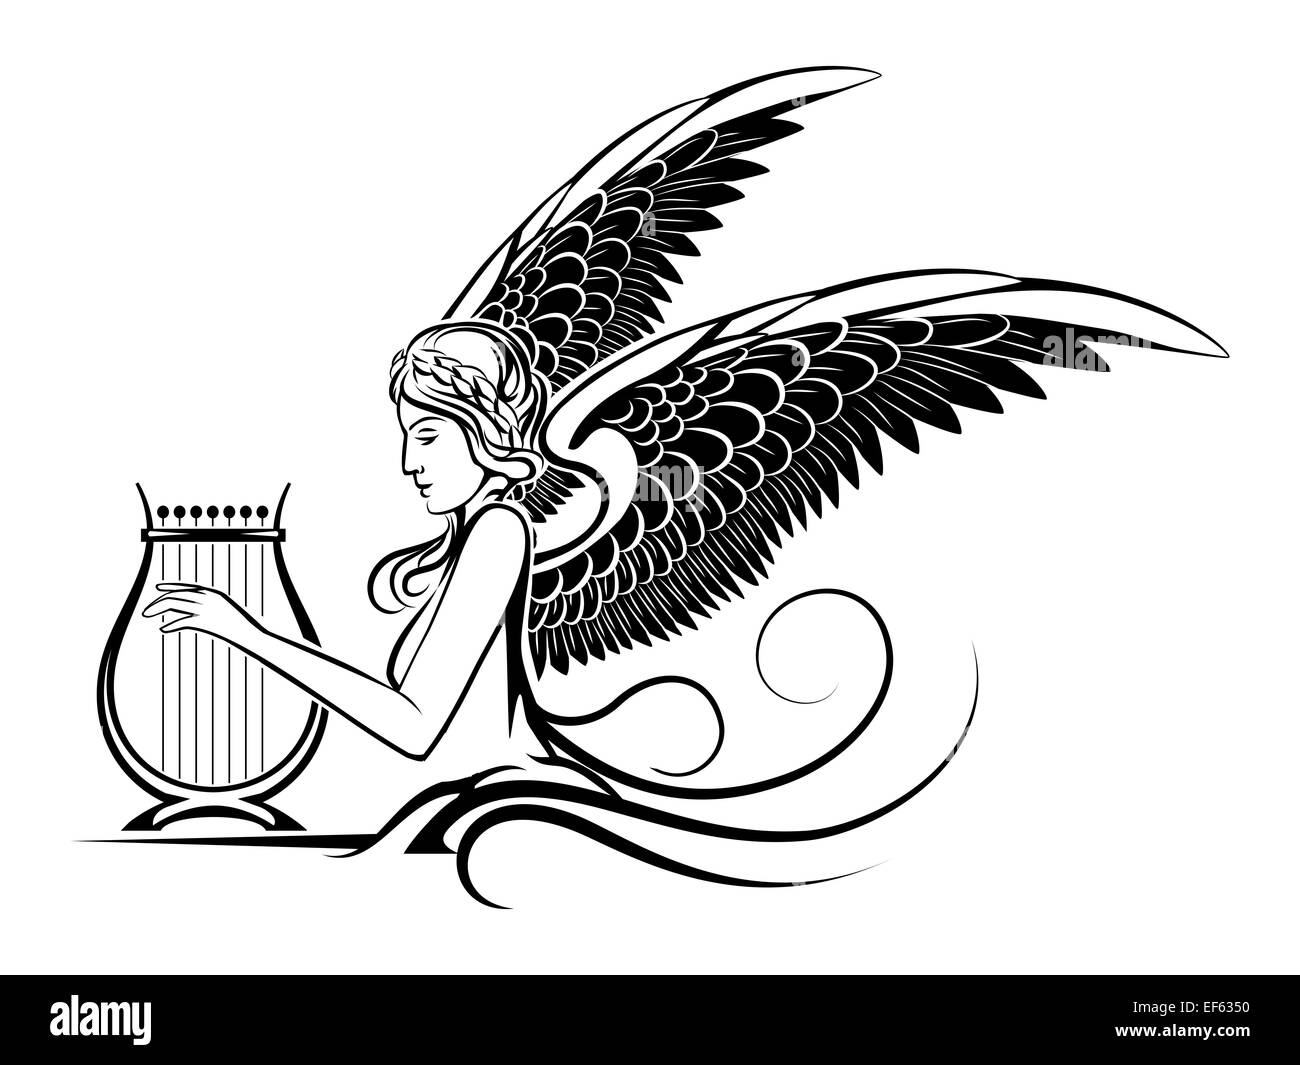 Illustration of ancient winged Muse playing on a harp. Isolated on white background. Stock Photo